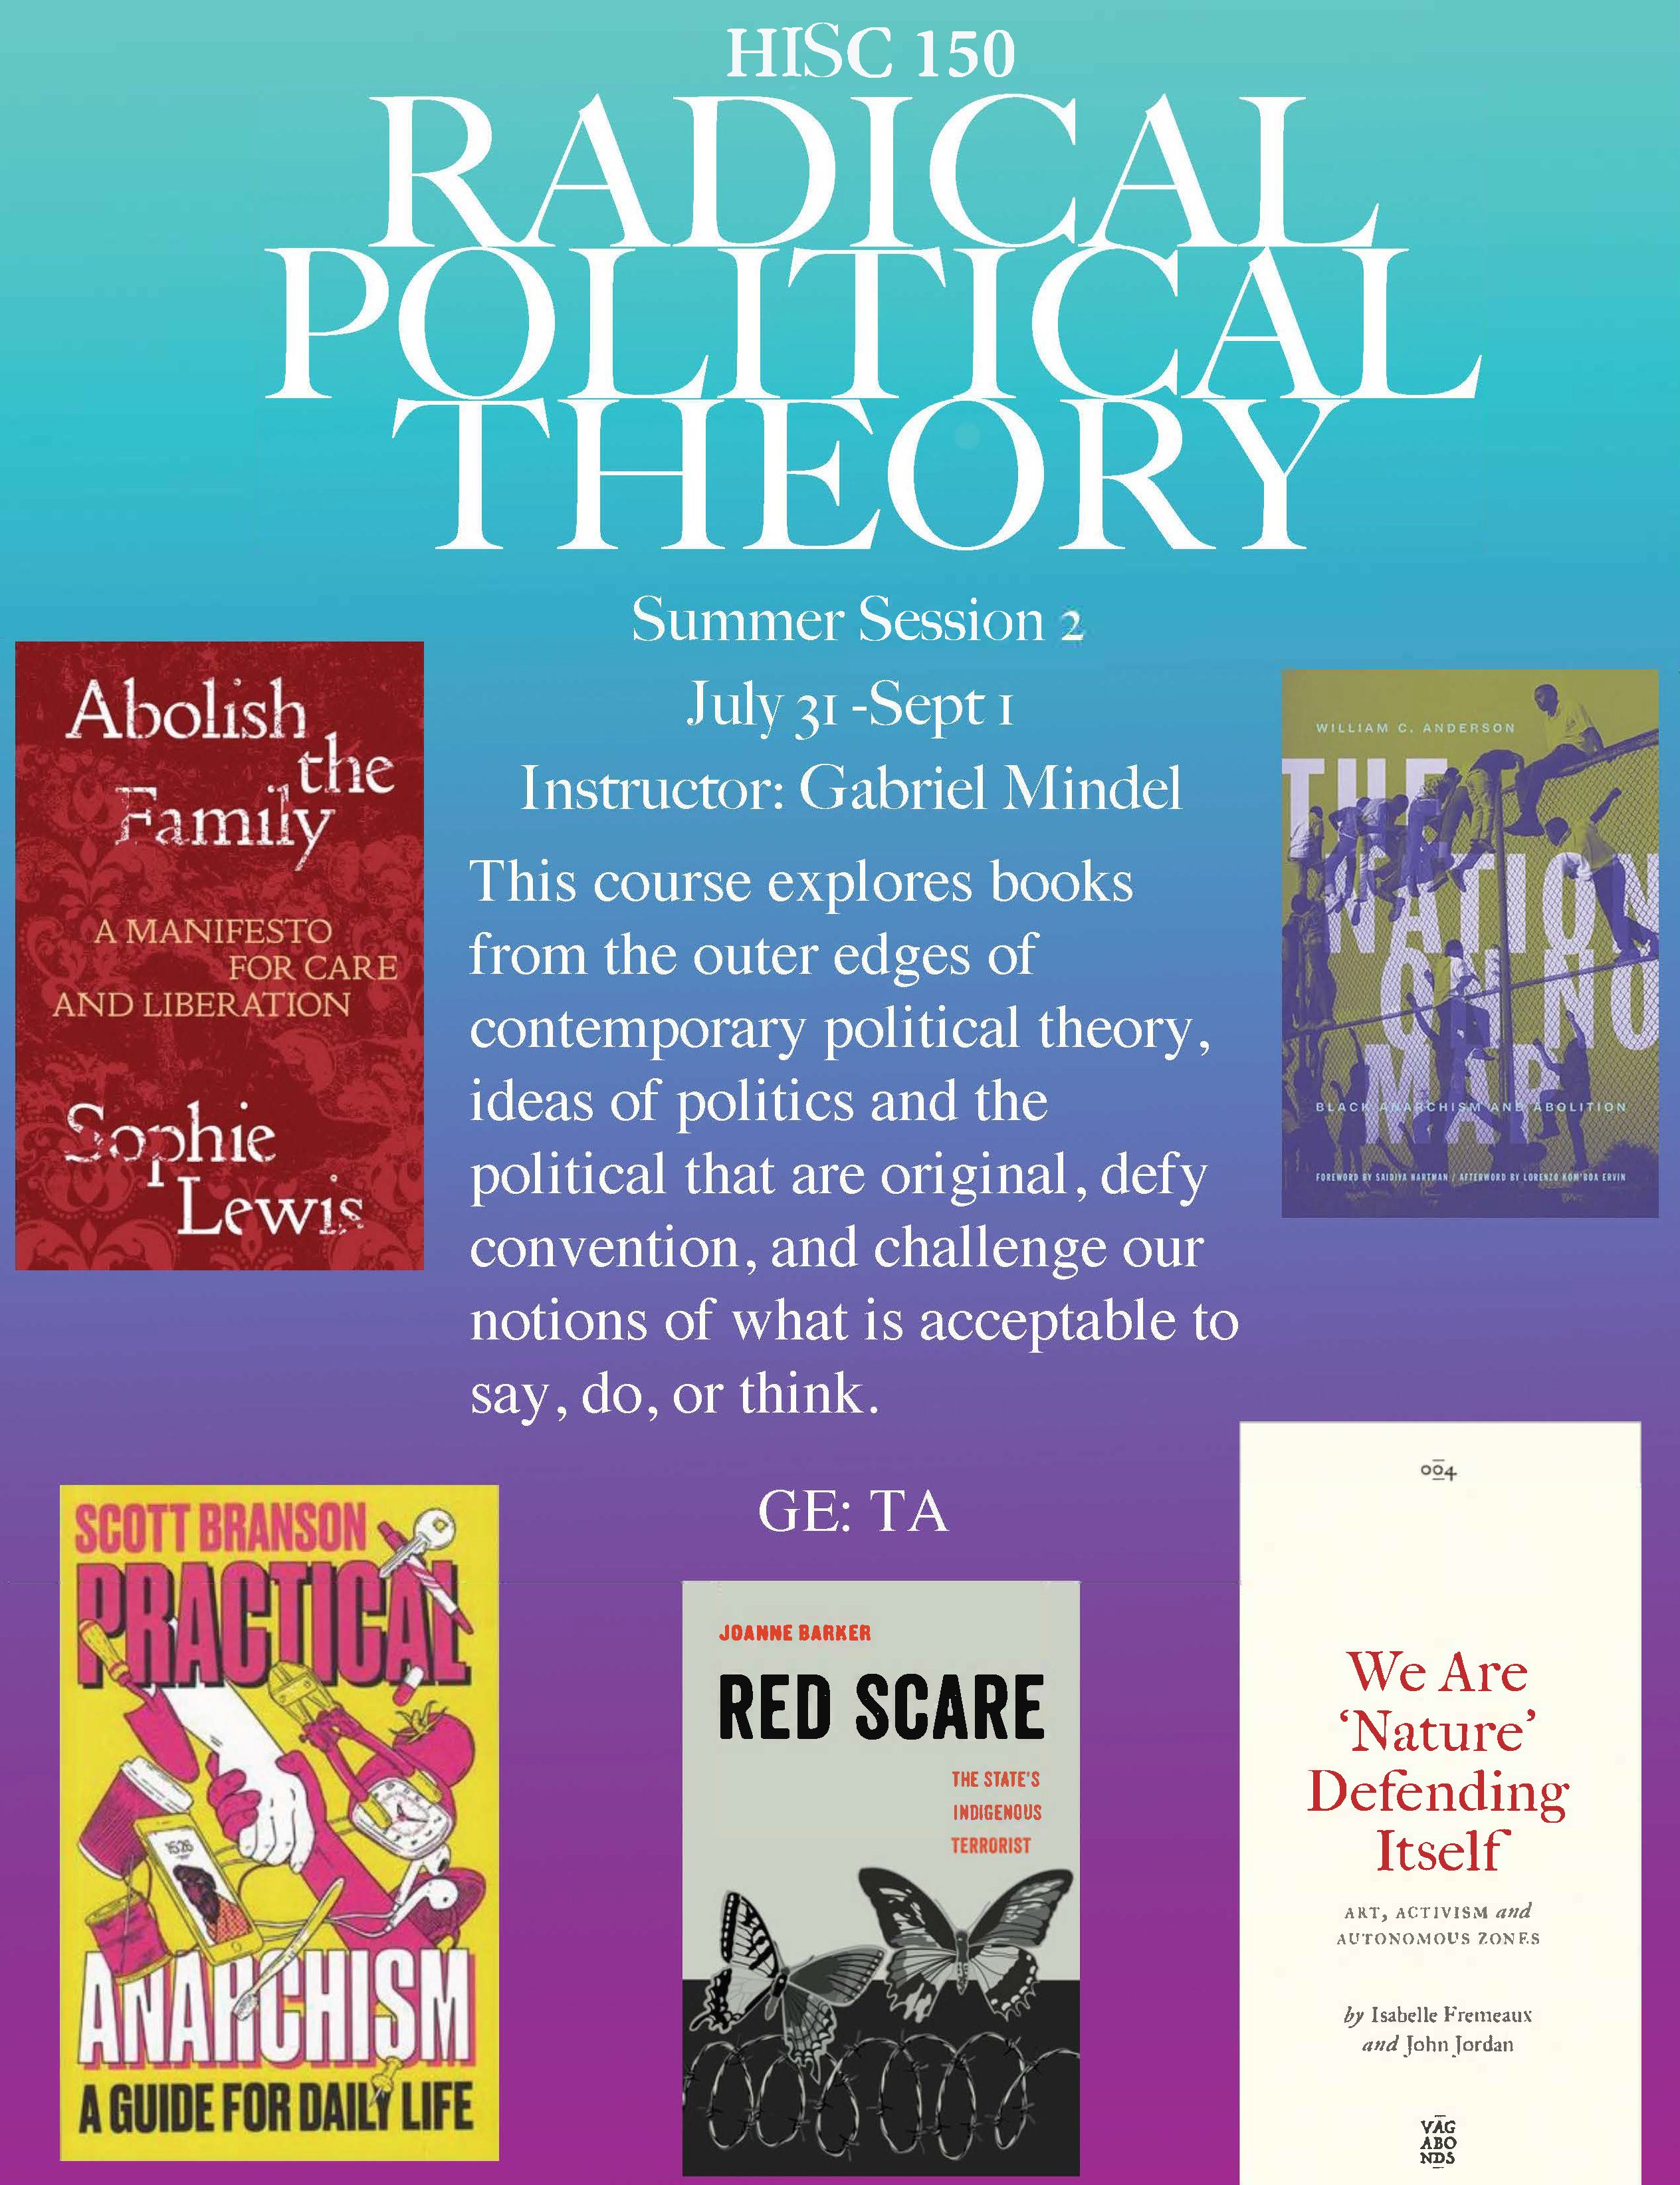 HISC 150: Radical Political Theory Flyer